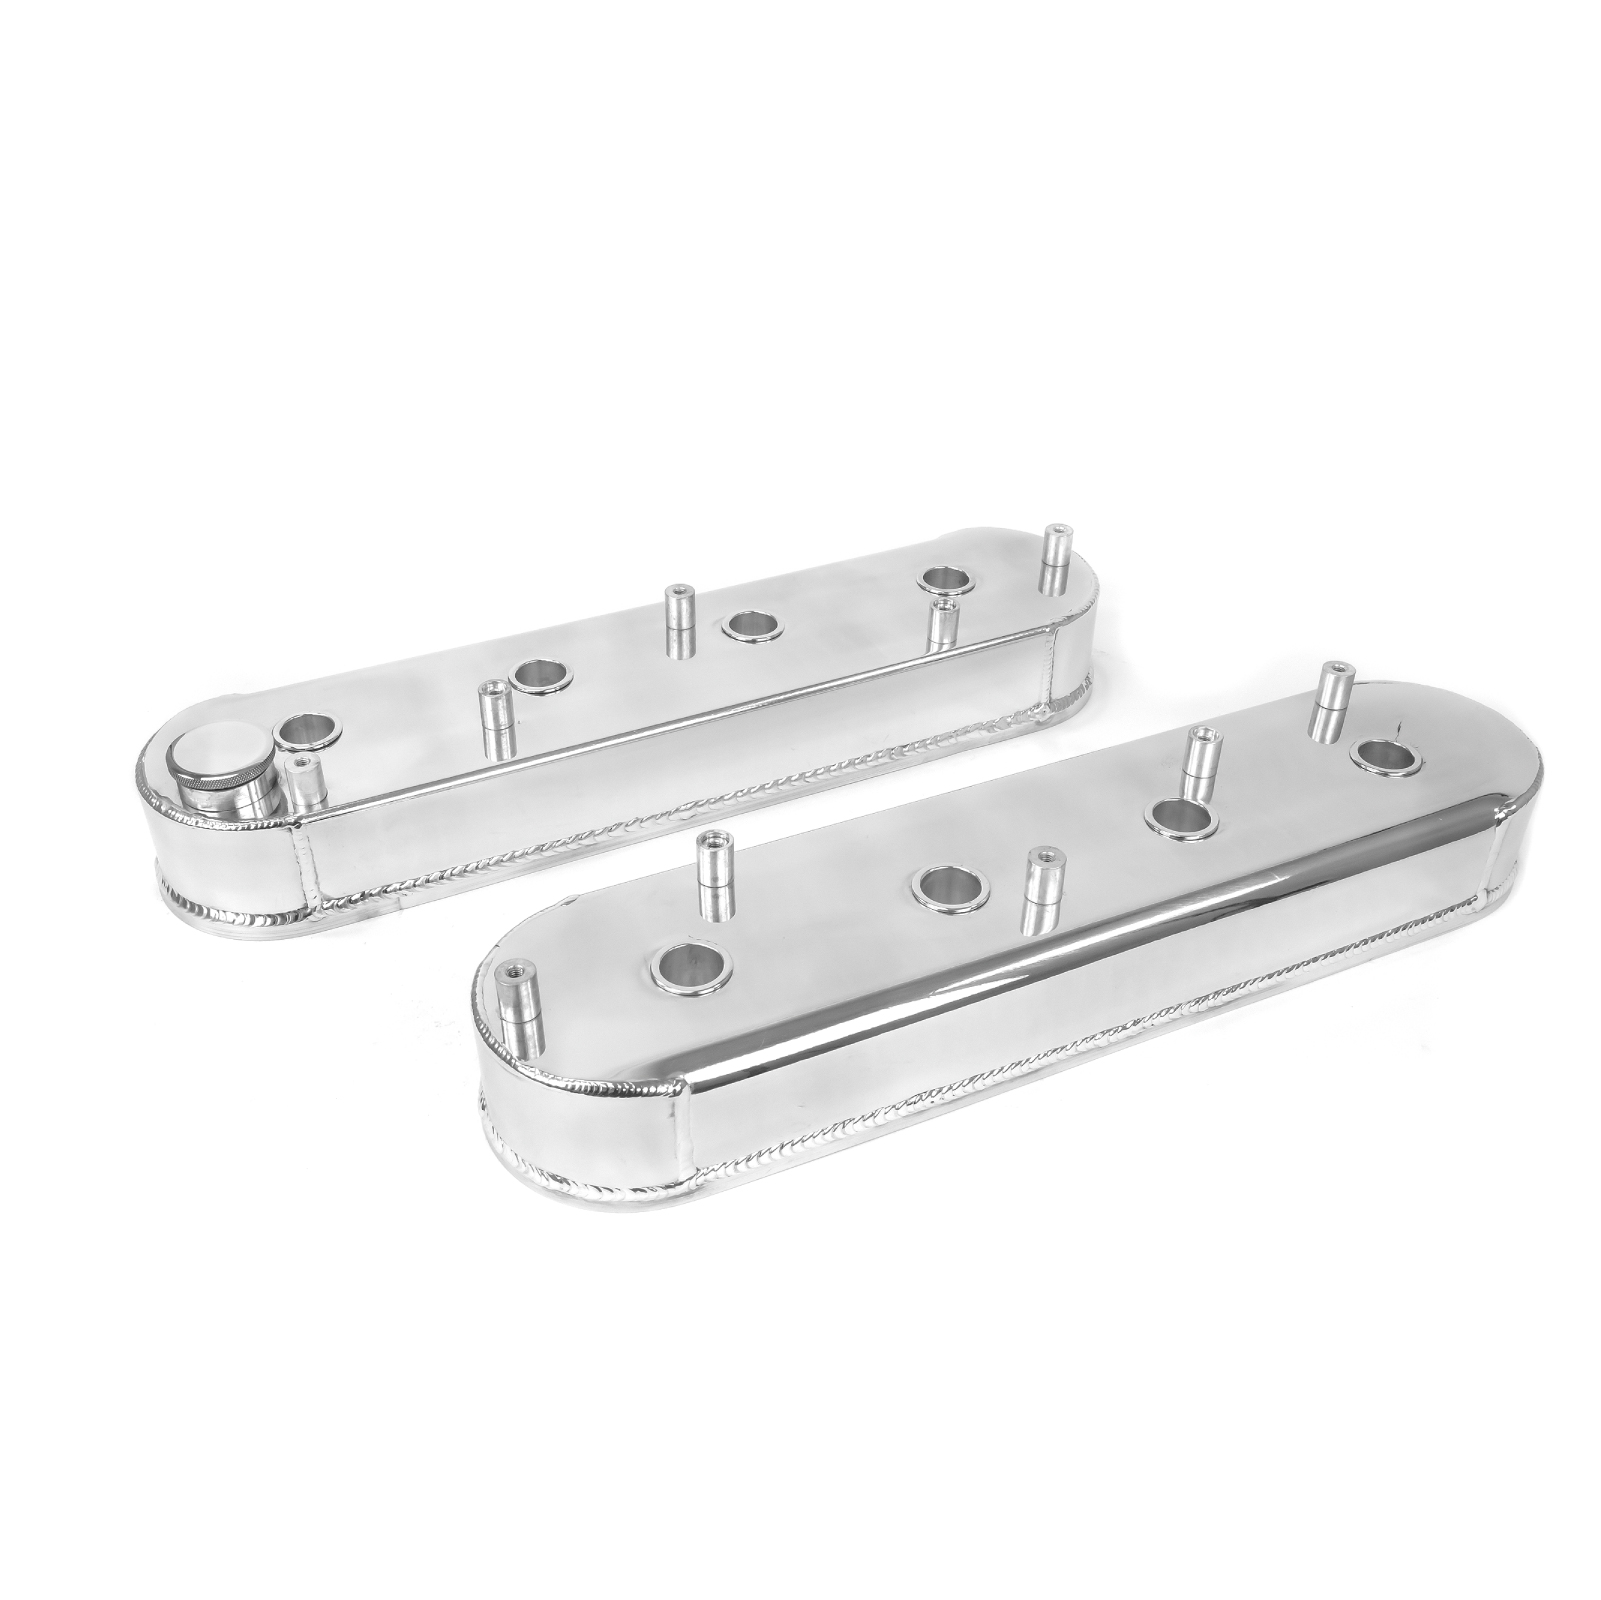 GM LSX V8 (4.8L-7.0L) Polished Fabricated Aluminum Valve Covers with Coil Bracket Mounts